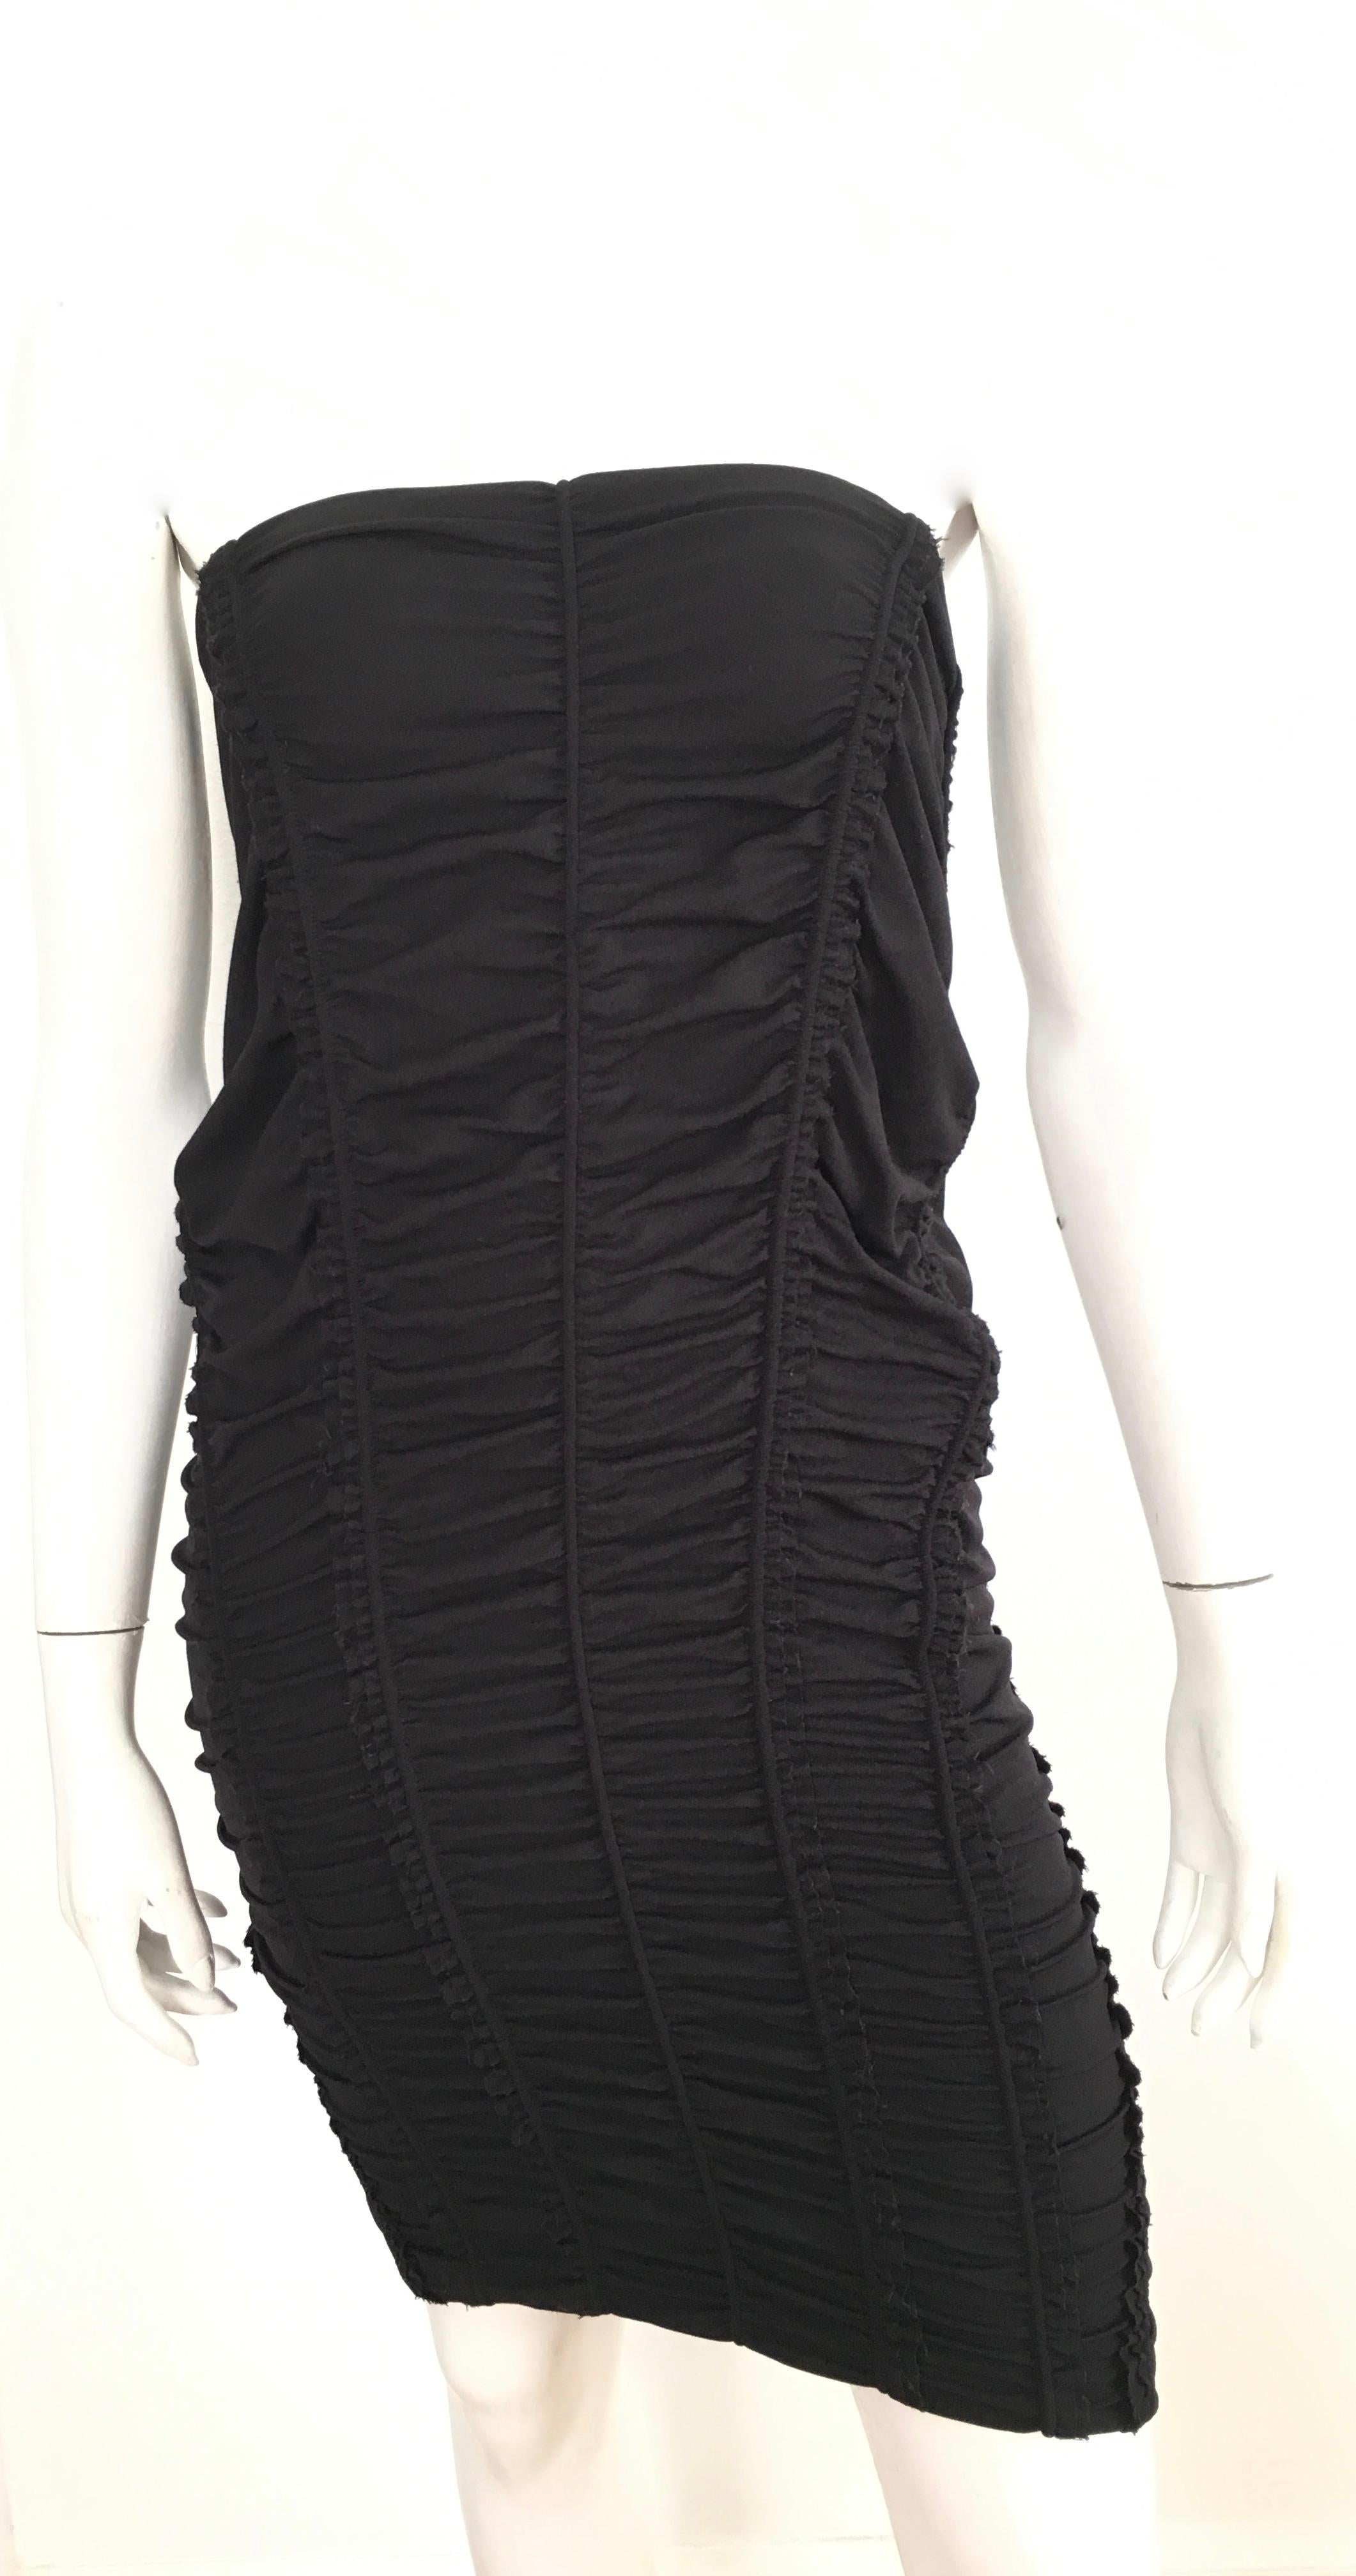 Donna Karan New York 2000s black parachute dress is labeled a size 8 but fits more like a size 6. There is an elastic band around the top part of dress. Italian fabric is wool, nylon & spandex.  This show stopper dress is just stunning, it has the